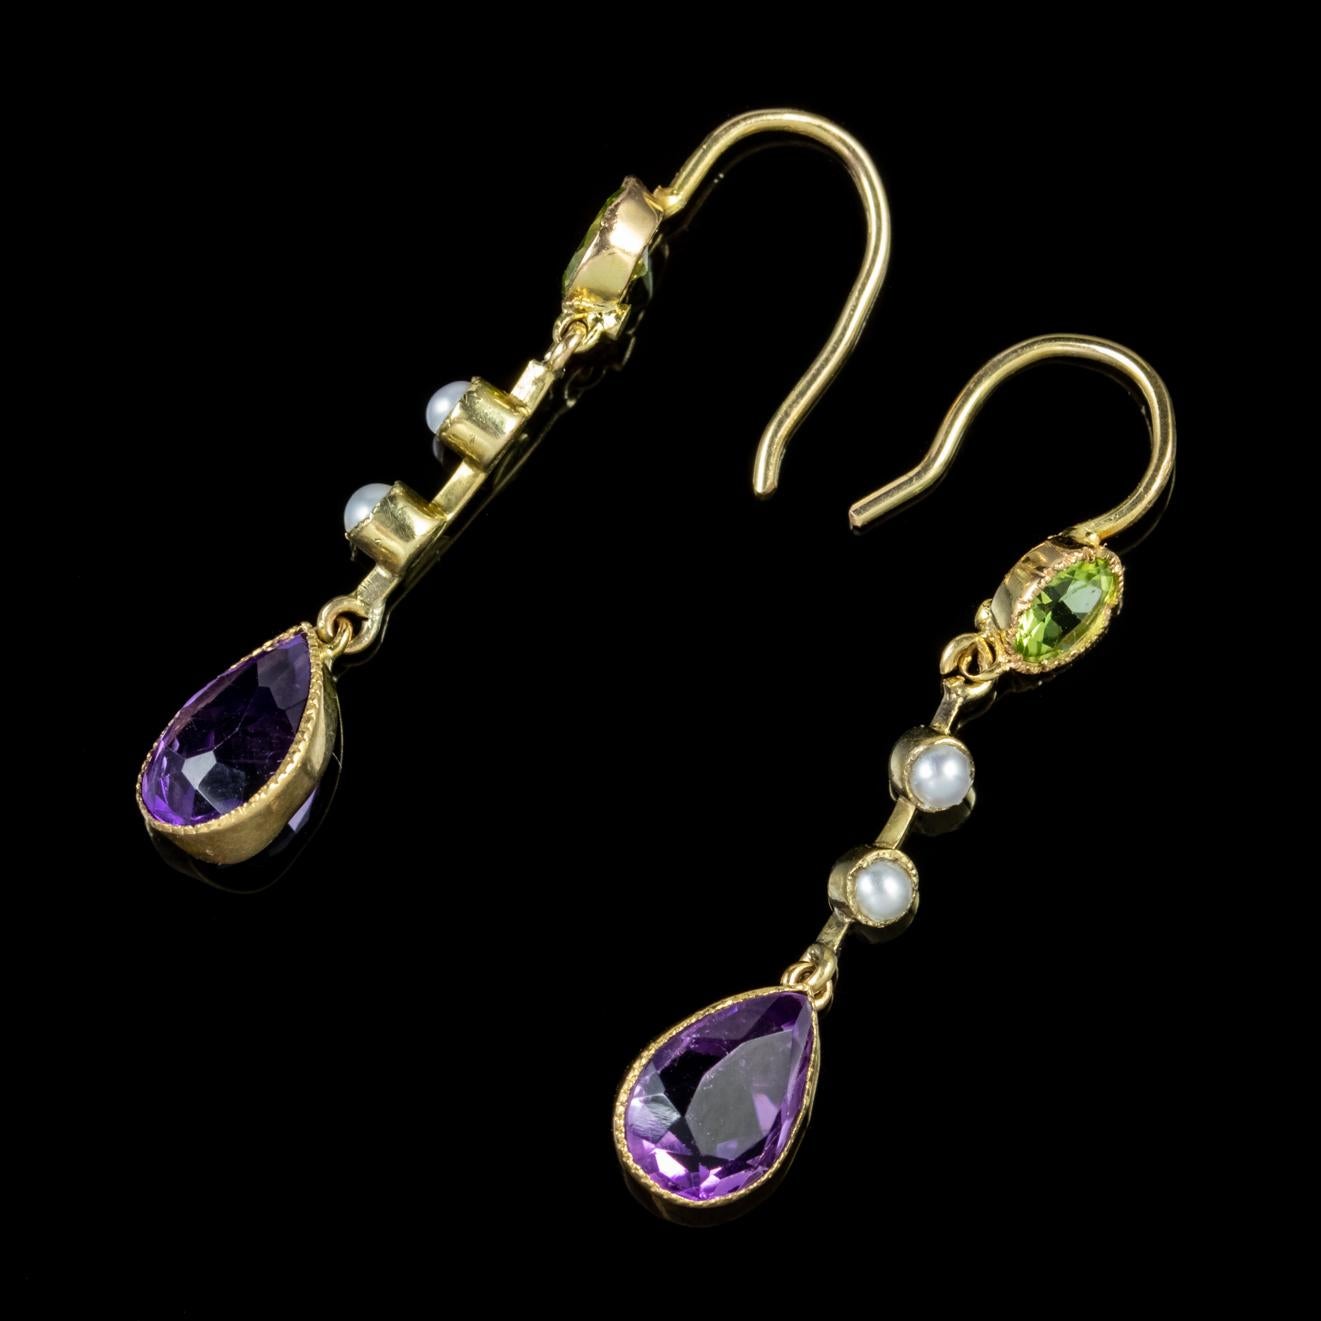 A fabulous pair of Suffragette drop earrings from the Edwardian era decorated with Peridots, Pearls and dangling teardrop Amethysts. 

Suffragette jewellery was worn to show one’s allegiance to the women’s Suffragette movement in the early 20th